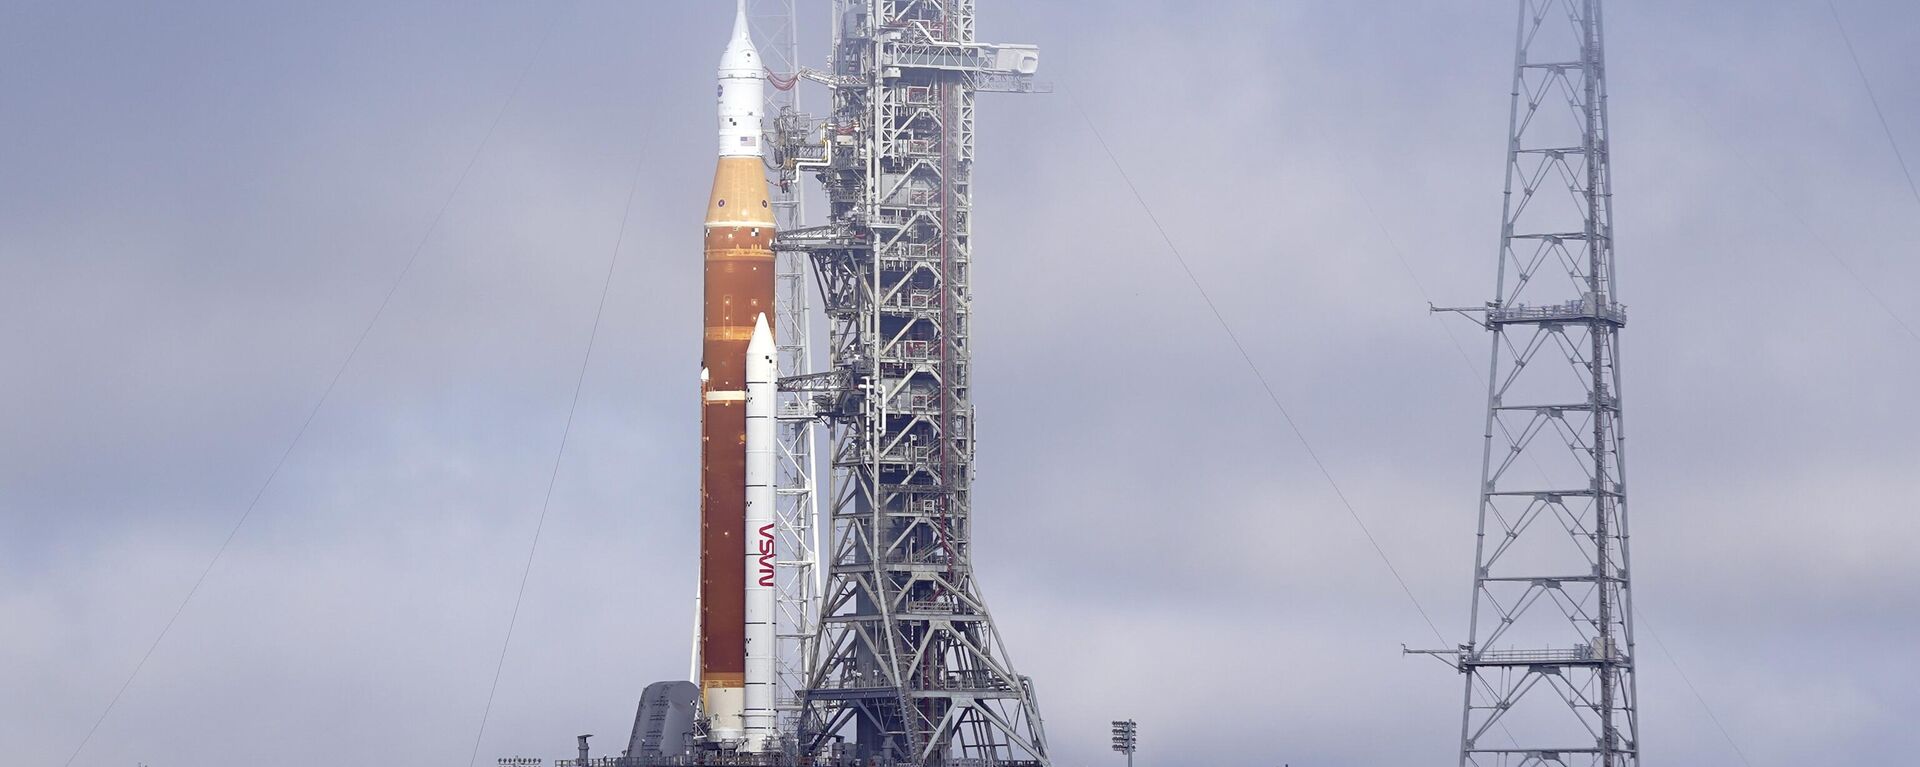 The NASA Artemis rocket with the Orion spacecraft aboard stands on pad 39B at the Kennedy Space Center in Cape Canaveral, Fla., Friday, March 18, 2022. NASA is kicking off a critical countdown test for its new moon rocket. The two-day dress rehearsal began Friday, April 1, 2022 at Florida's Kennedy Space Center and will culminate Sunday with the loading of the rocket's fuel tanks. - Sputnik International, 1920, 02.04.2022